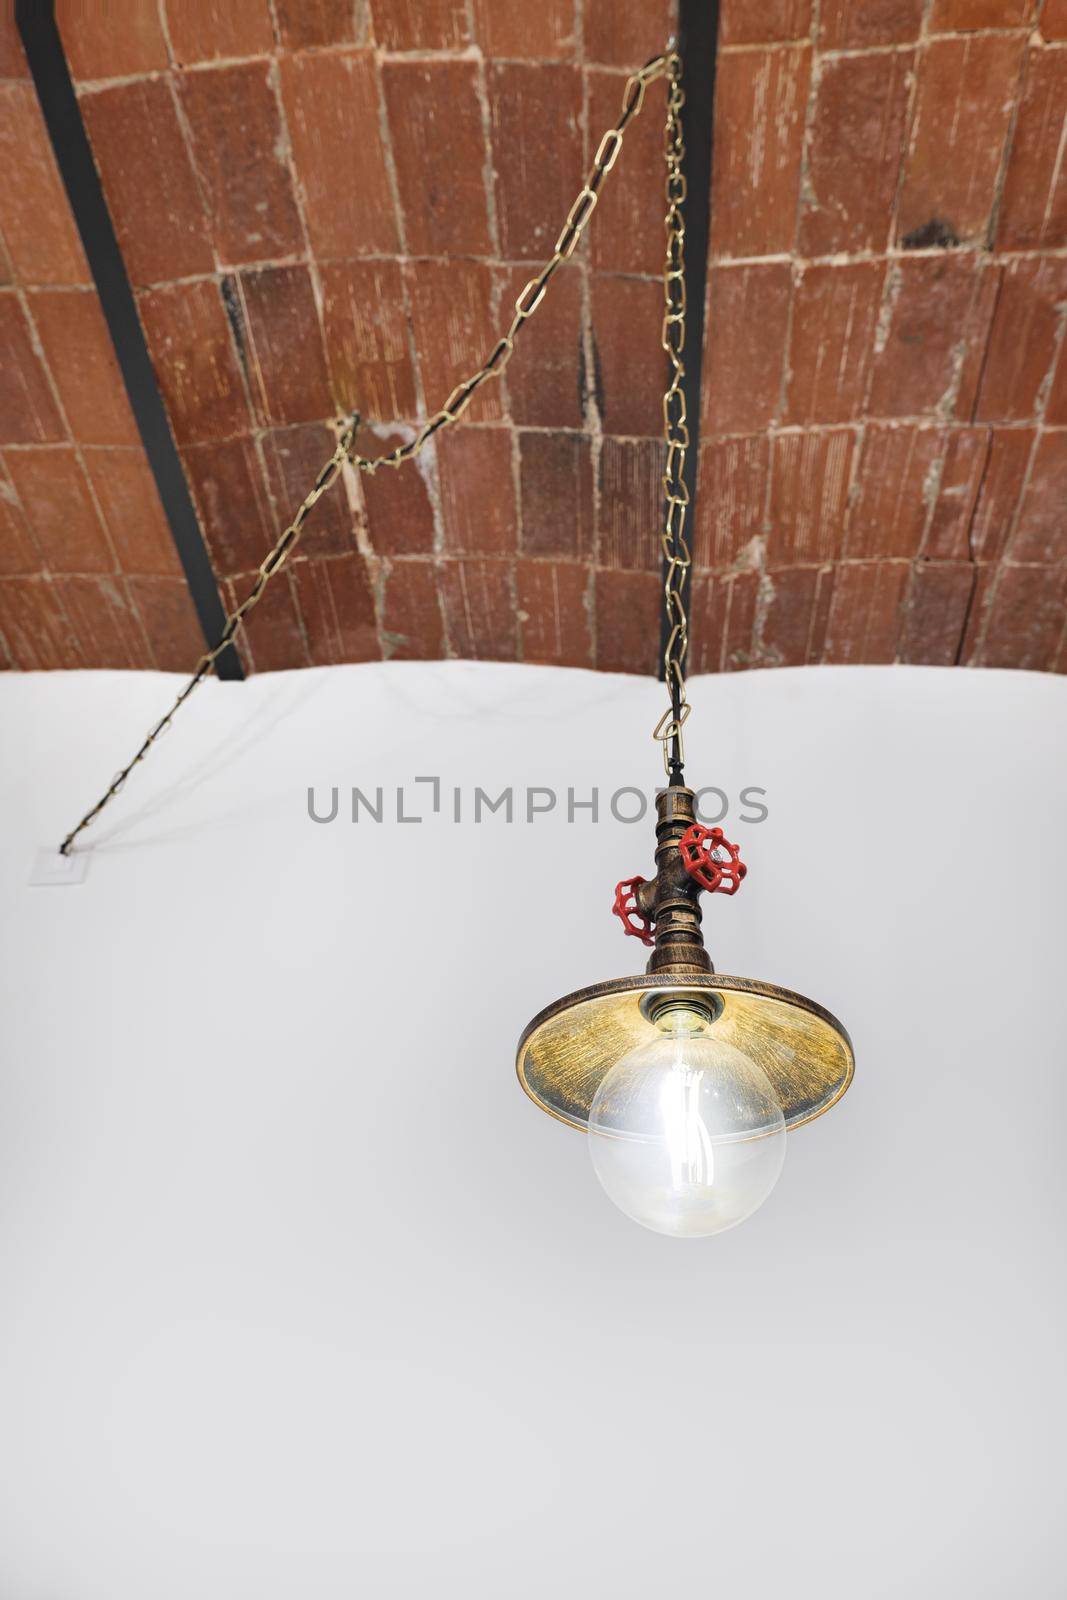 Vintage lamp of plumbing style hanging on chain on background of white wall with brick ceilings